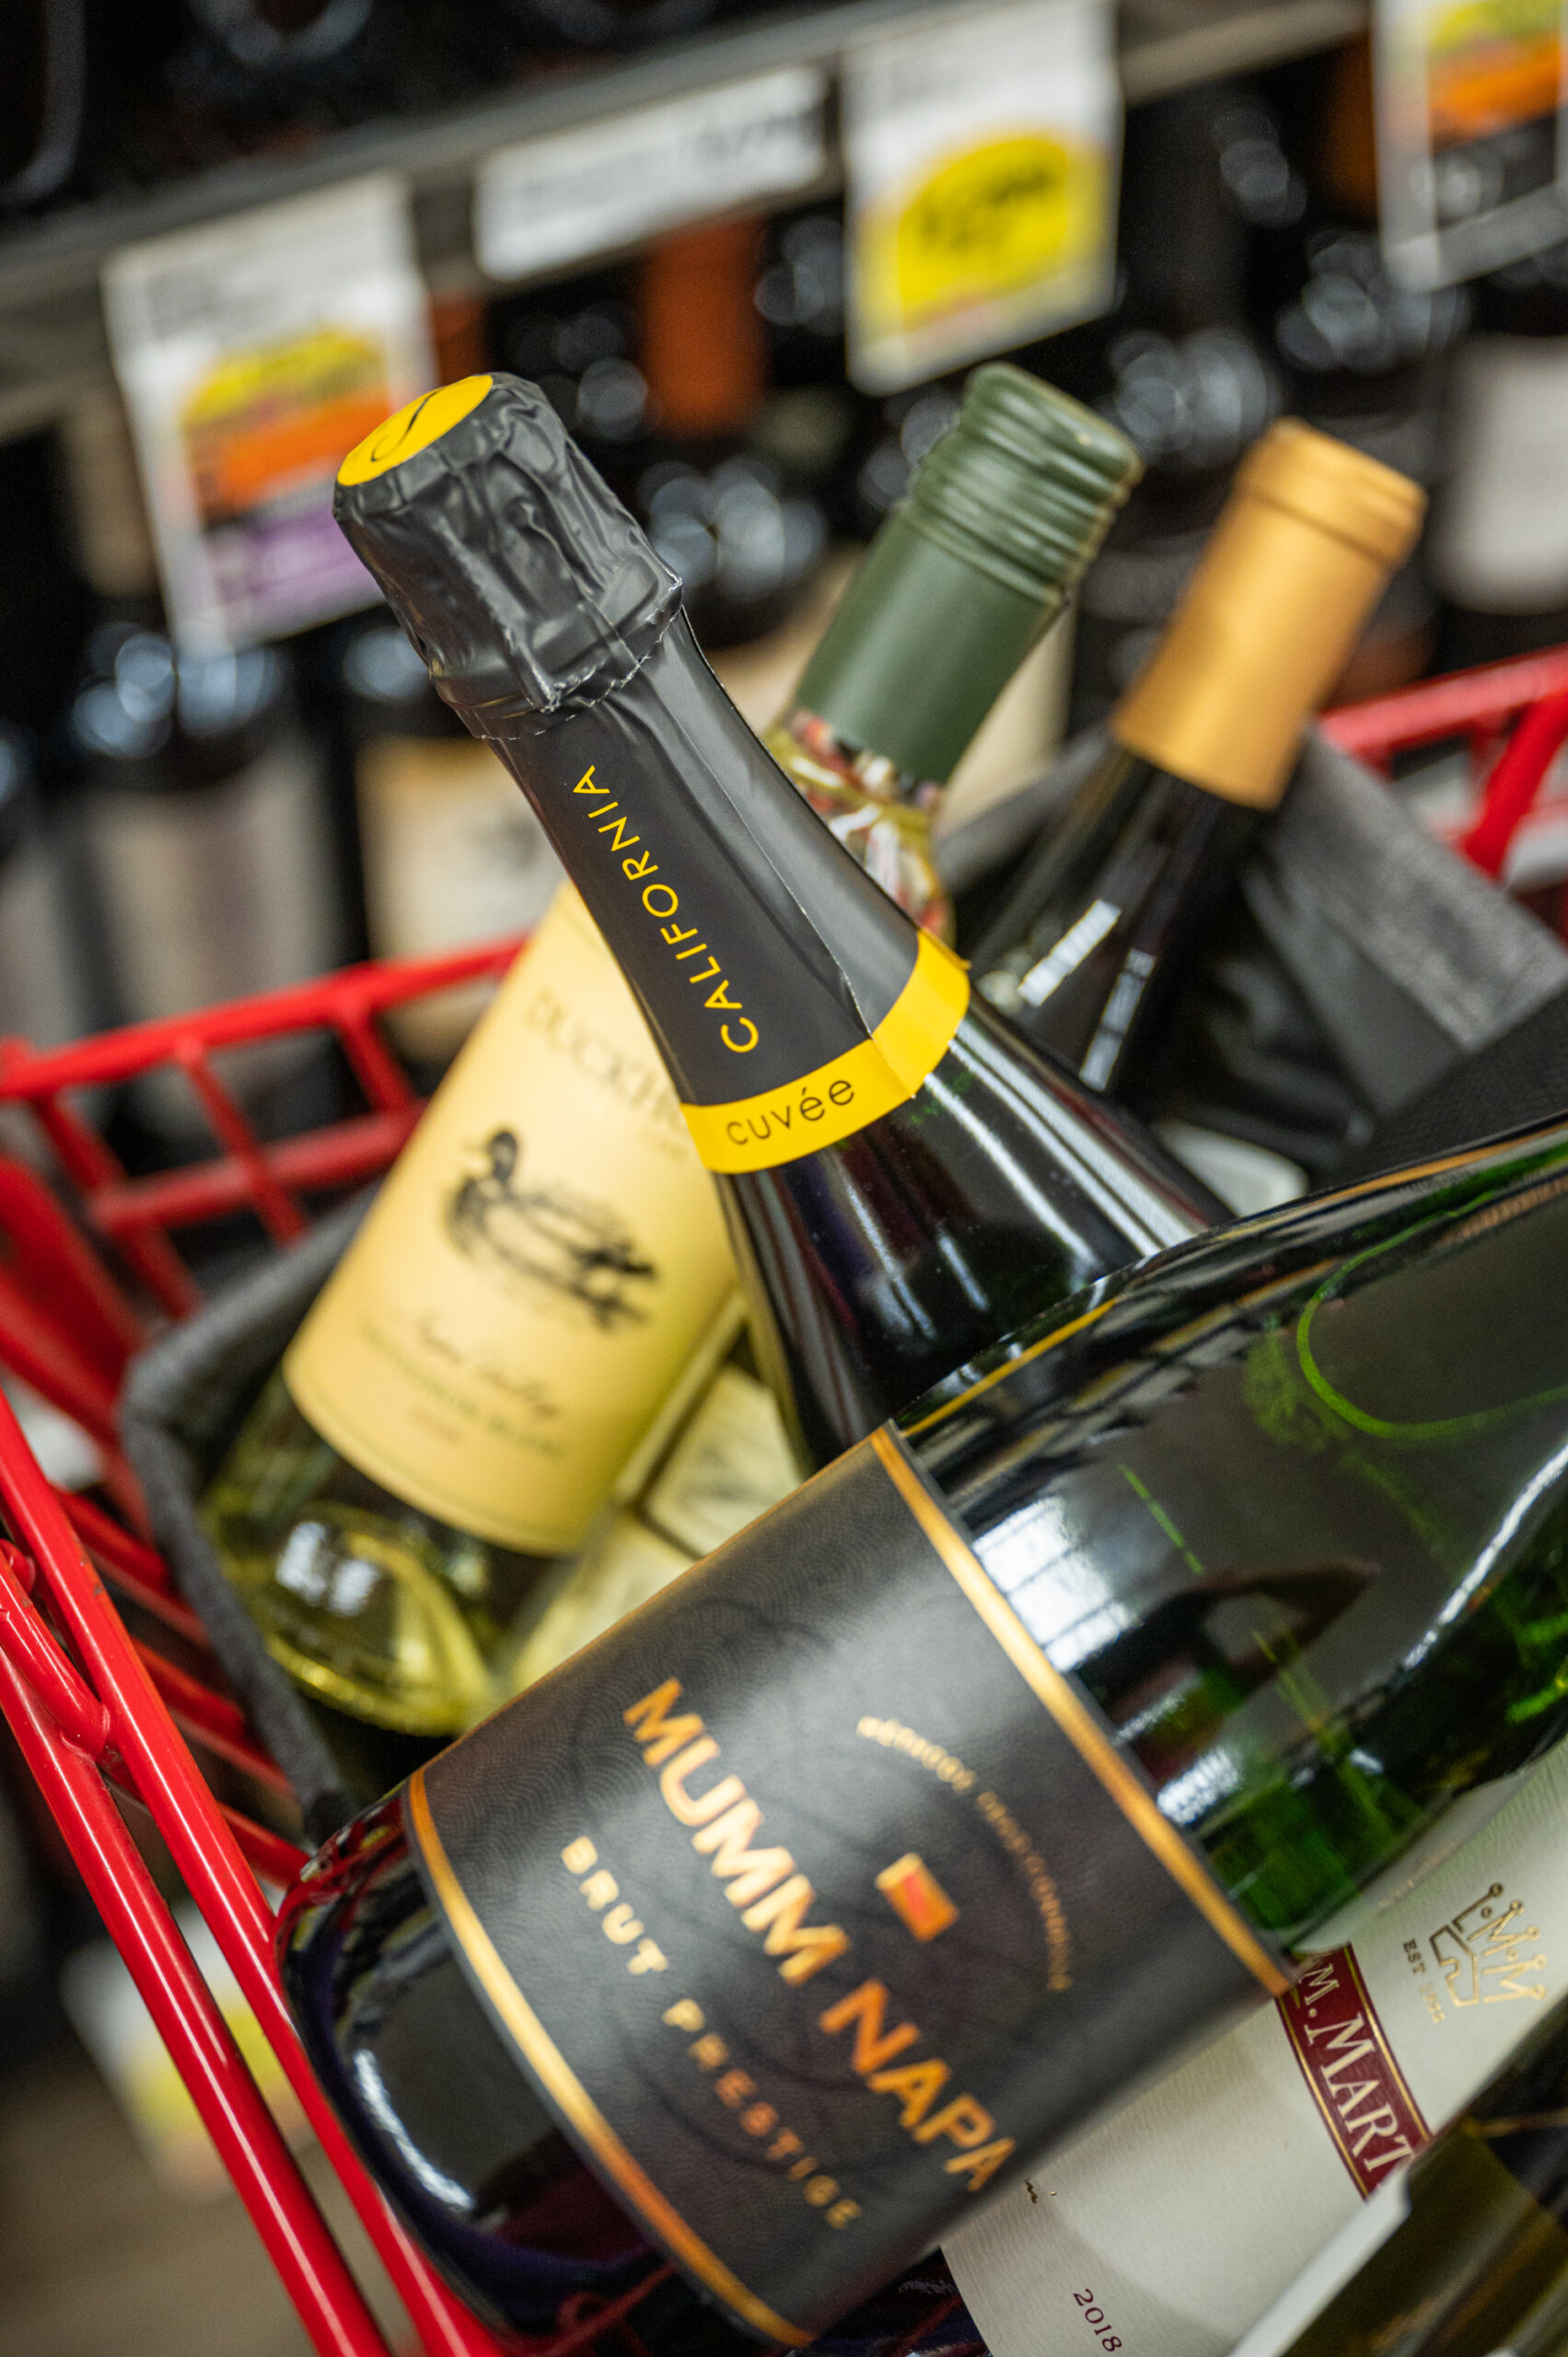 A grocery store selection of California wines